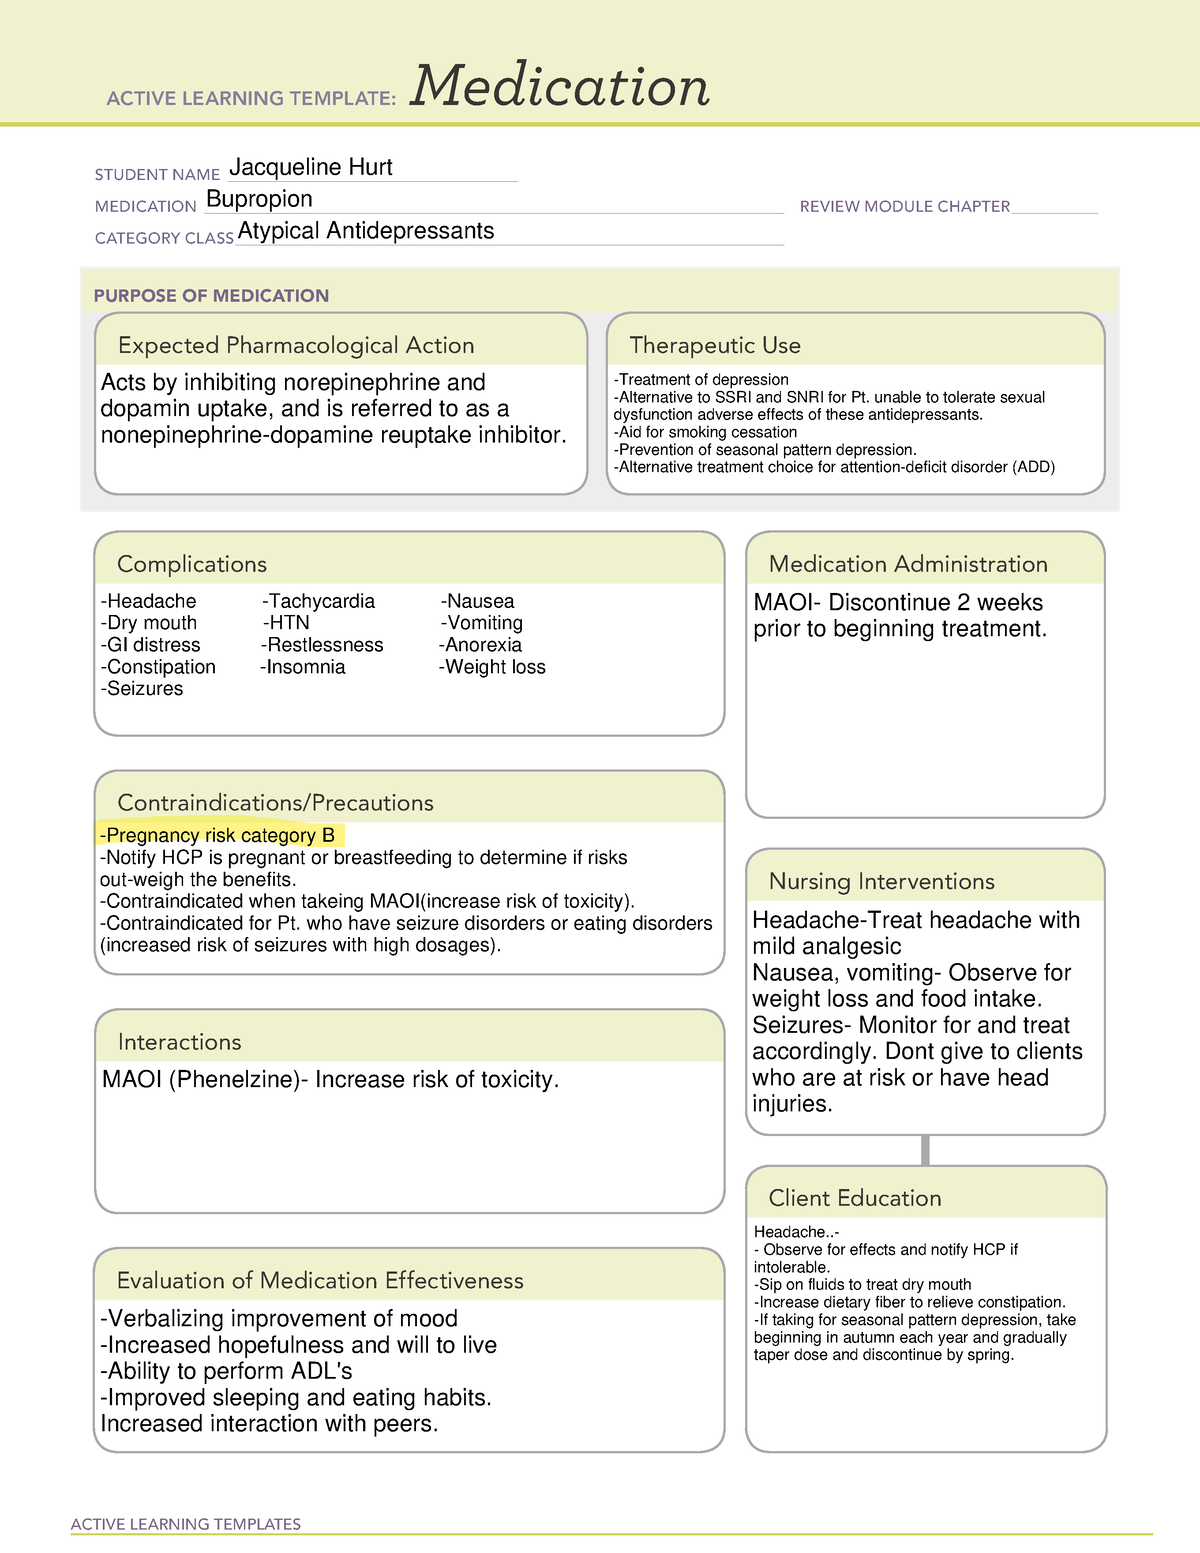 bupropion-active-learning-templates-medication-student-name